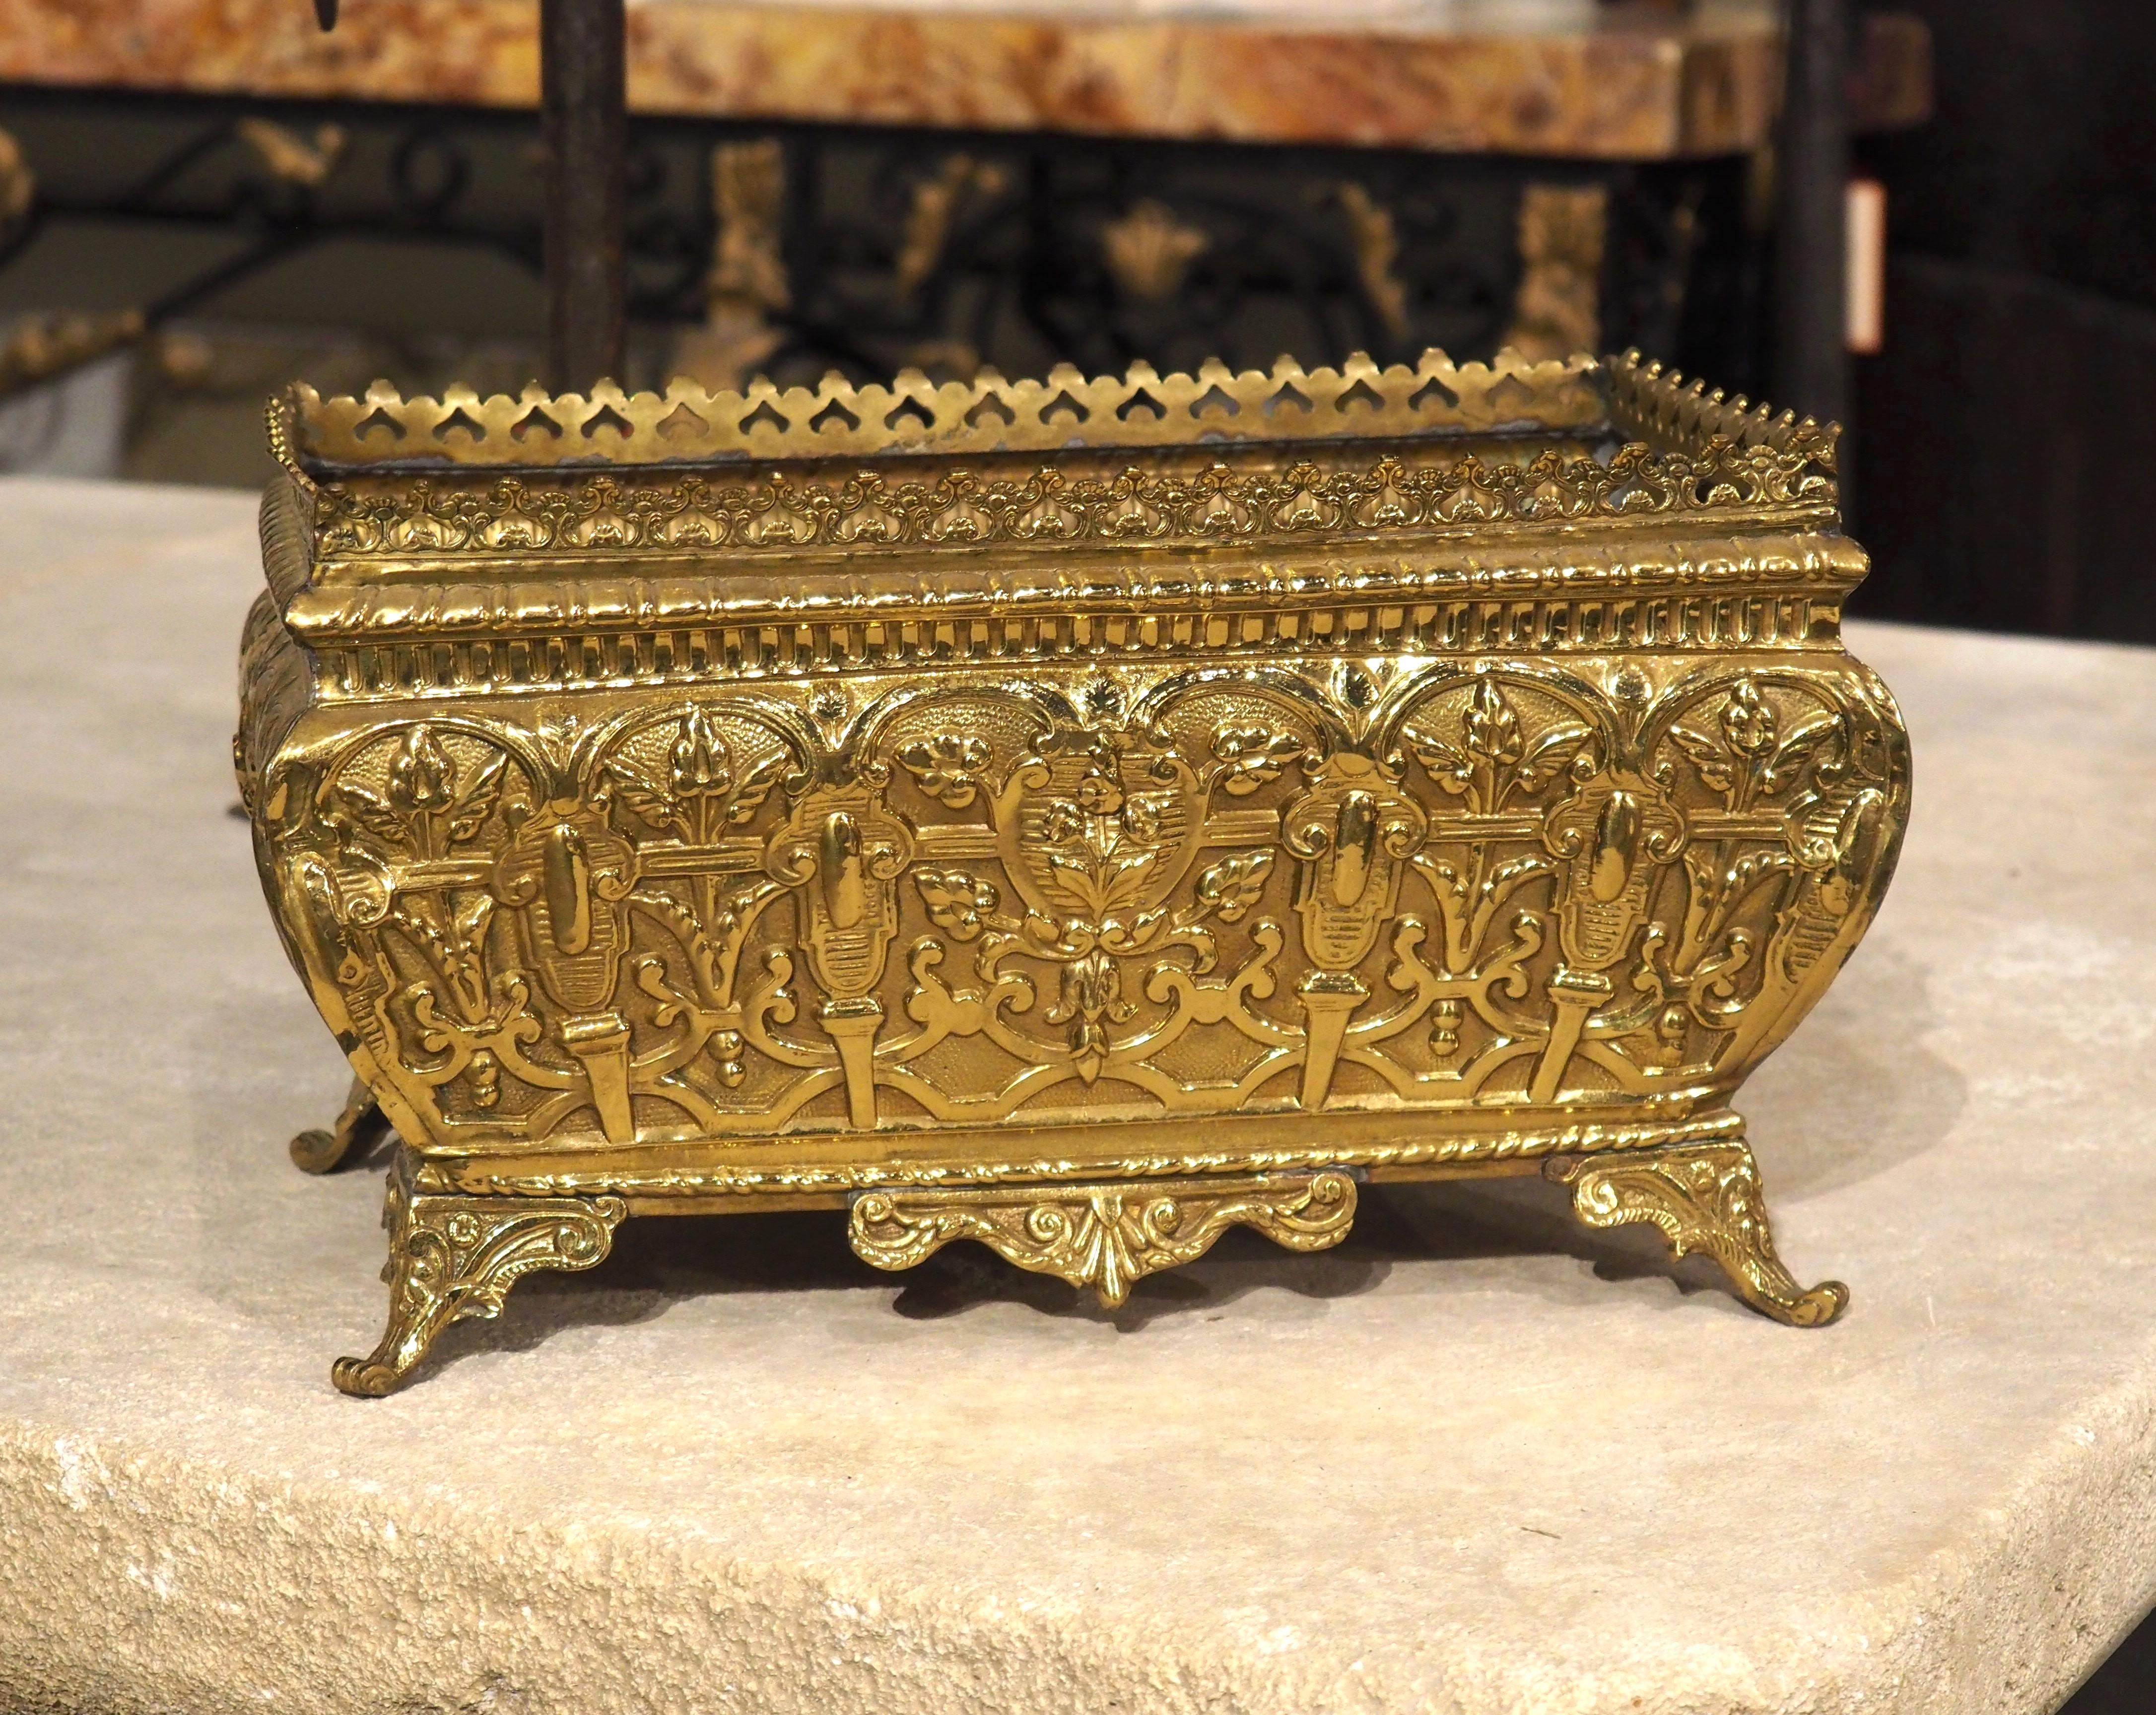 The hammered details (accomplished by the metalworking technique known as repousse) of this rectangular gilt brass jardiniere are quite exceptional. Performed by a master-level metalworker in France during the 1800s, the motifs feature a repeating